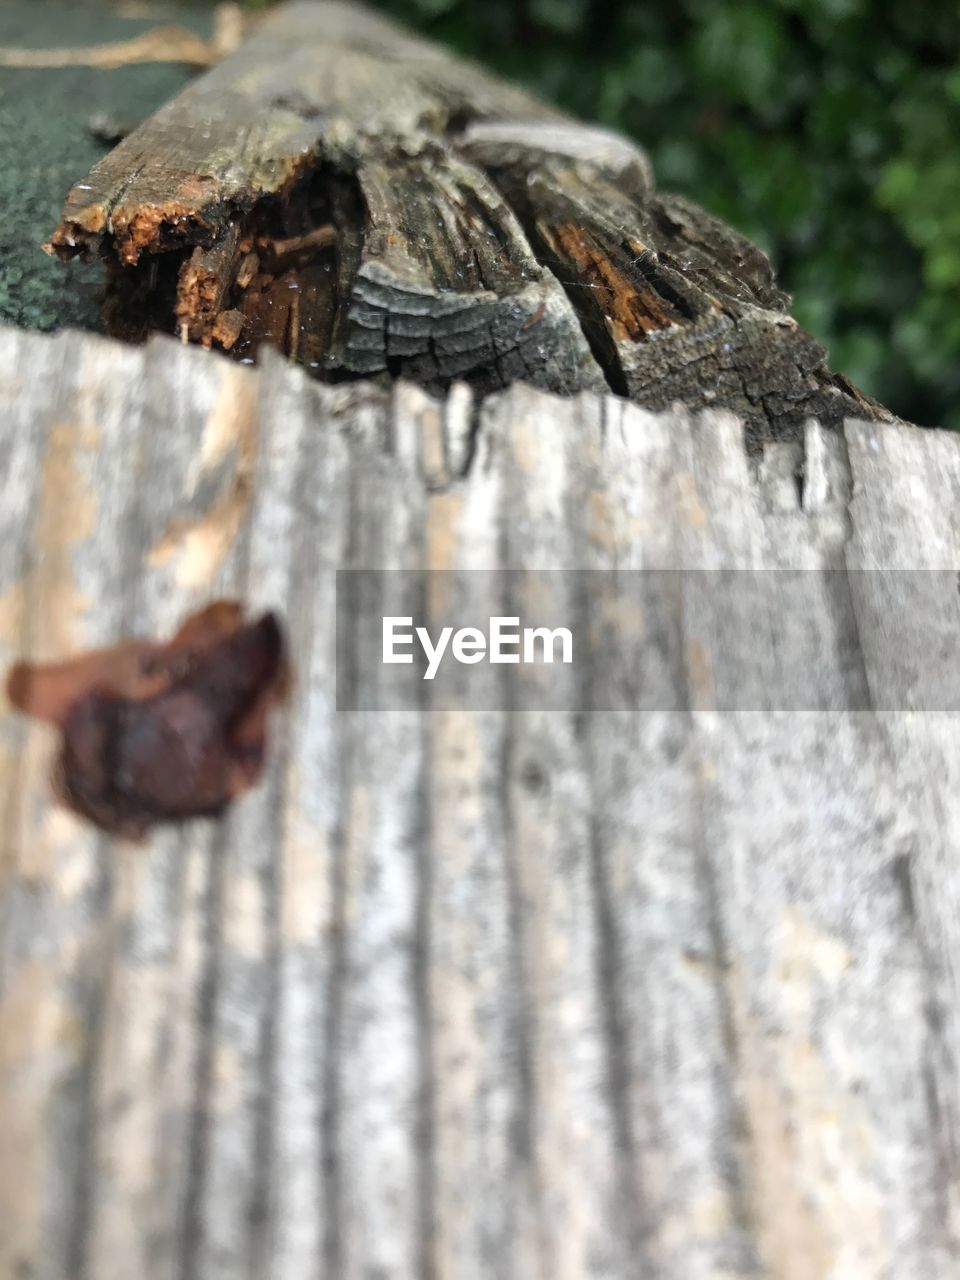 CLOSE-UP OF SNAKE ON WOOD